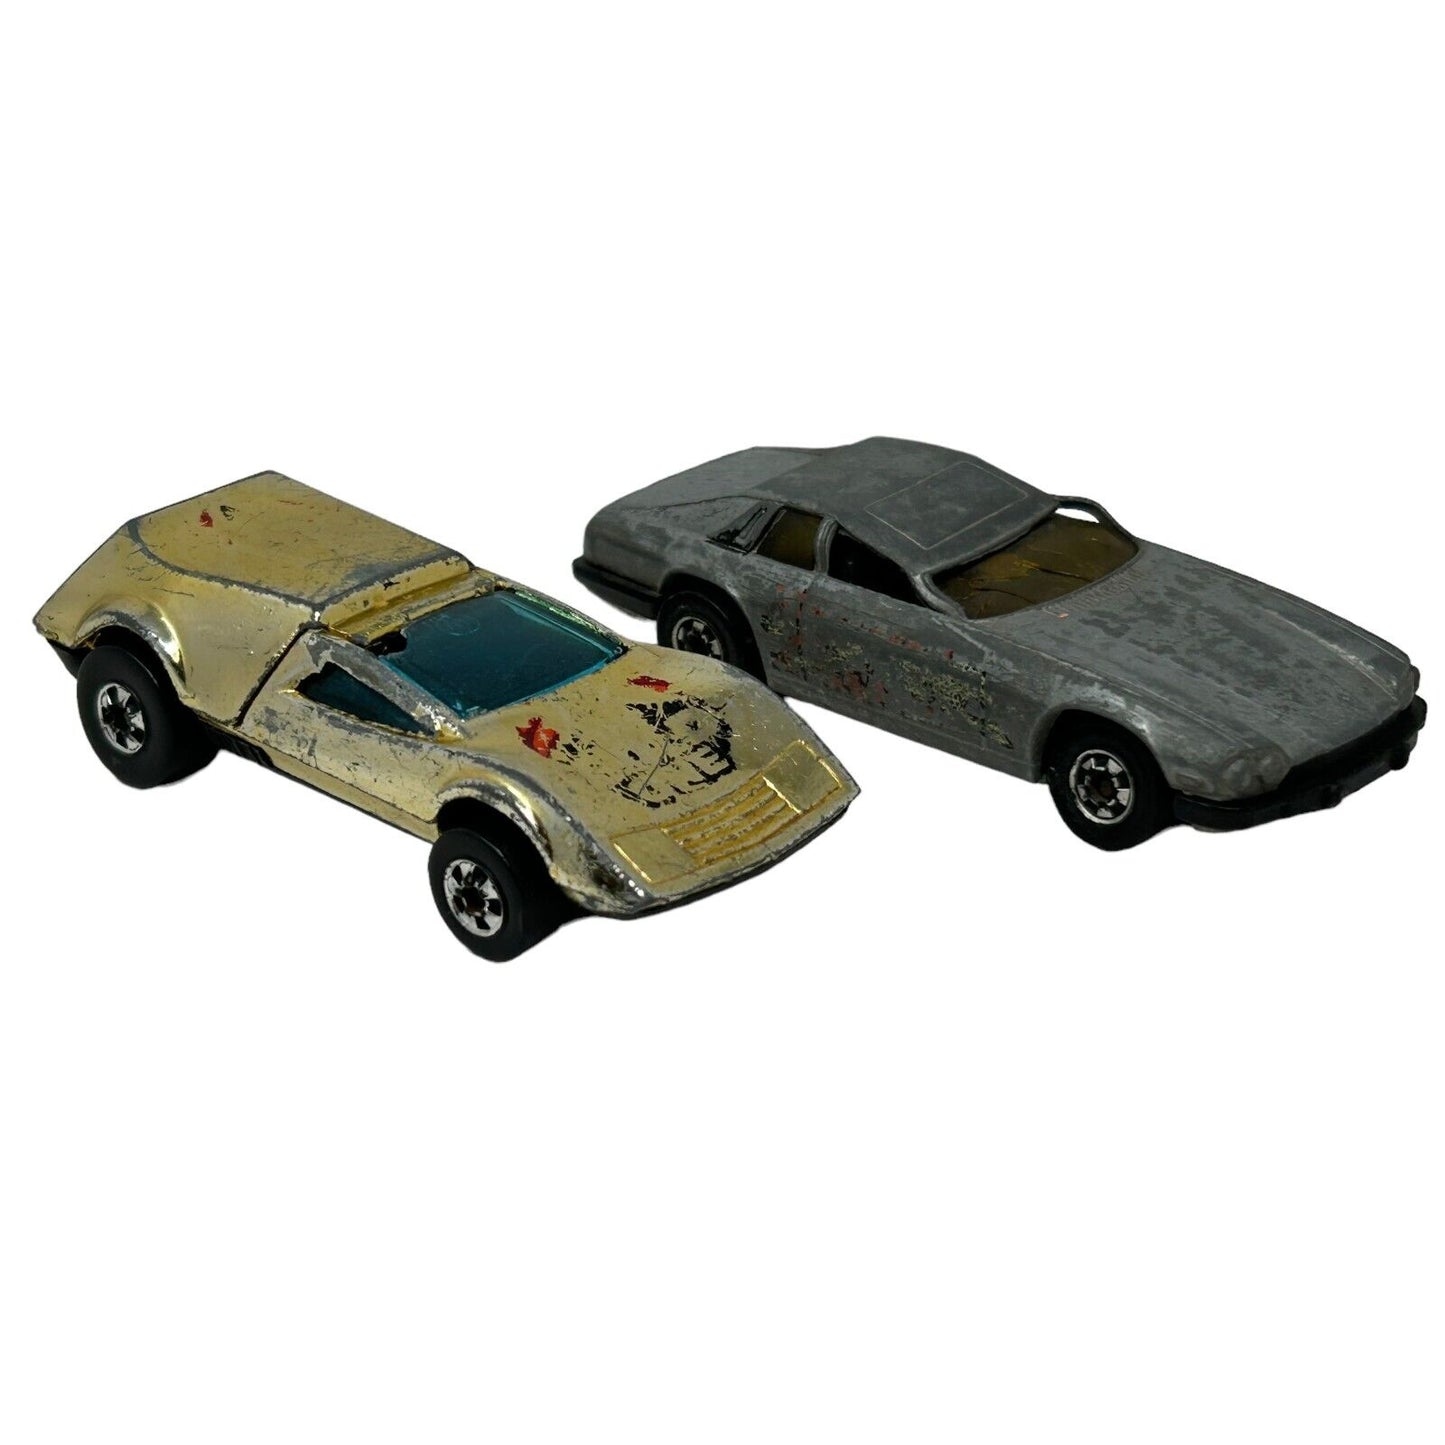 2 Hot Wheels Jaguar XJS Buzz-Off The Gold One Diecast Toy Car Vintage For Repair